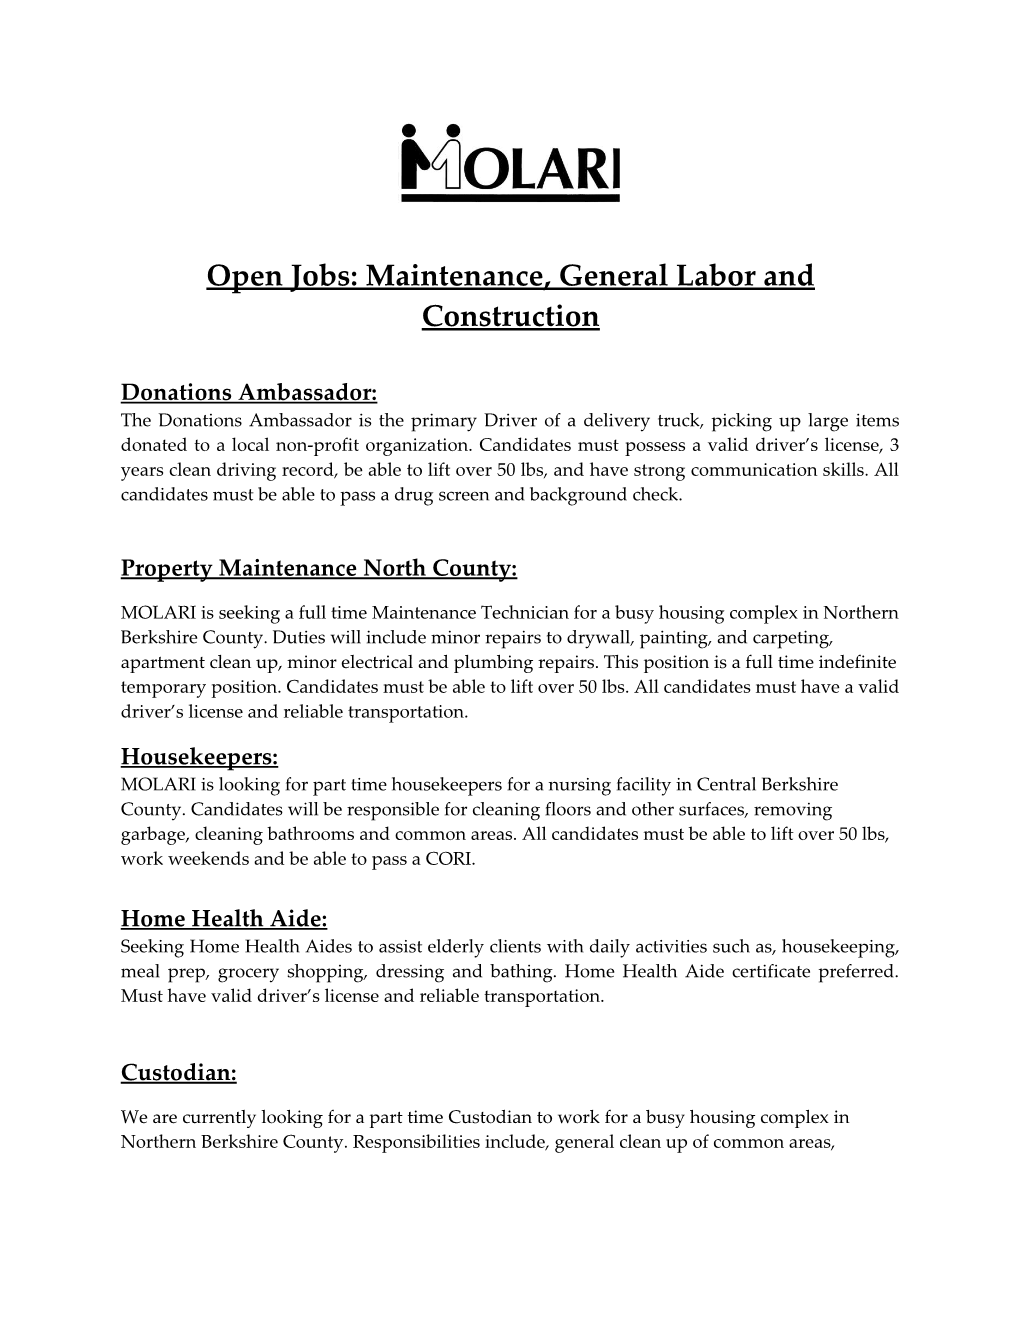 Open Jobs: Maintenance, General Labor and Construction